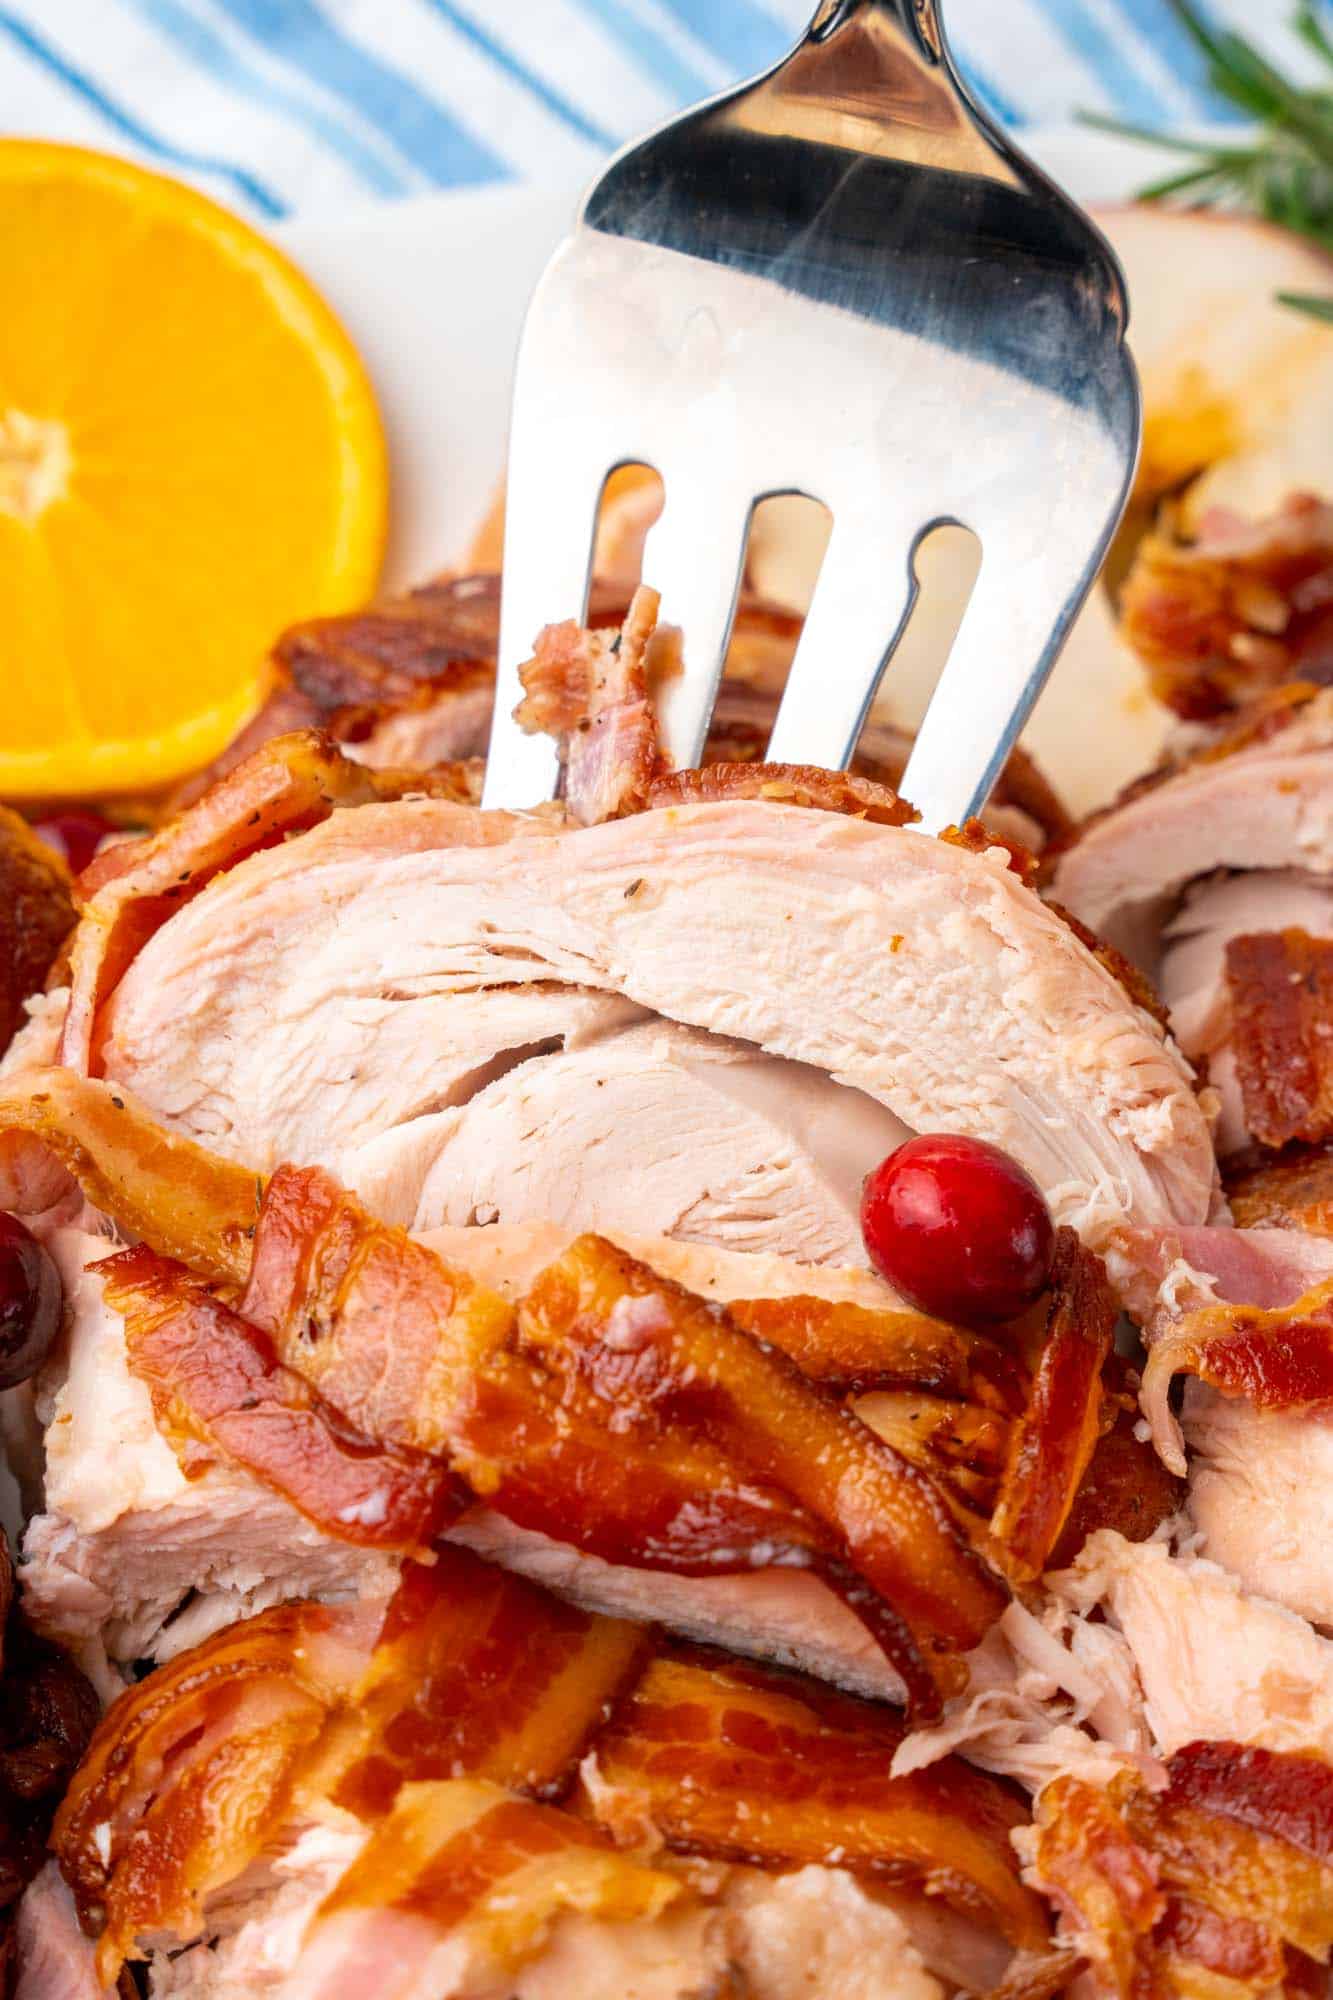 closup view of a sliced bacon wrapped turkey. A serving fork is picking up a slice of white meat.